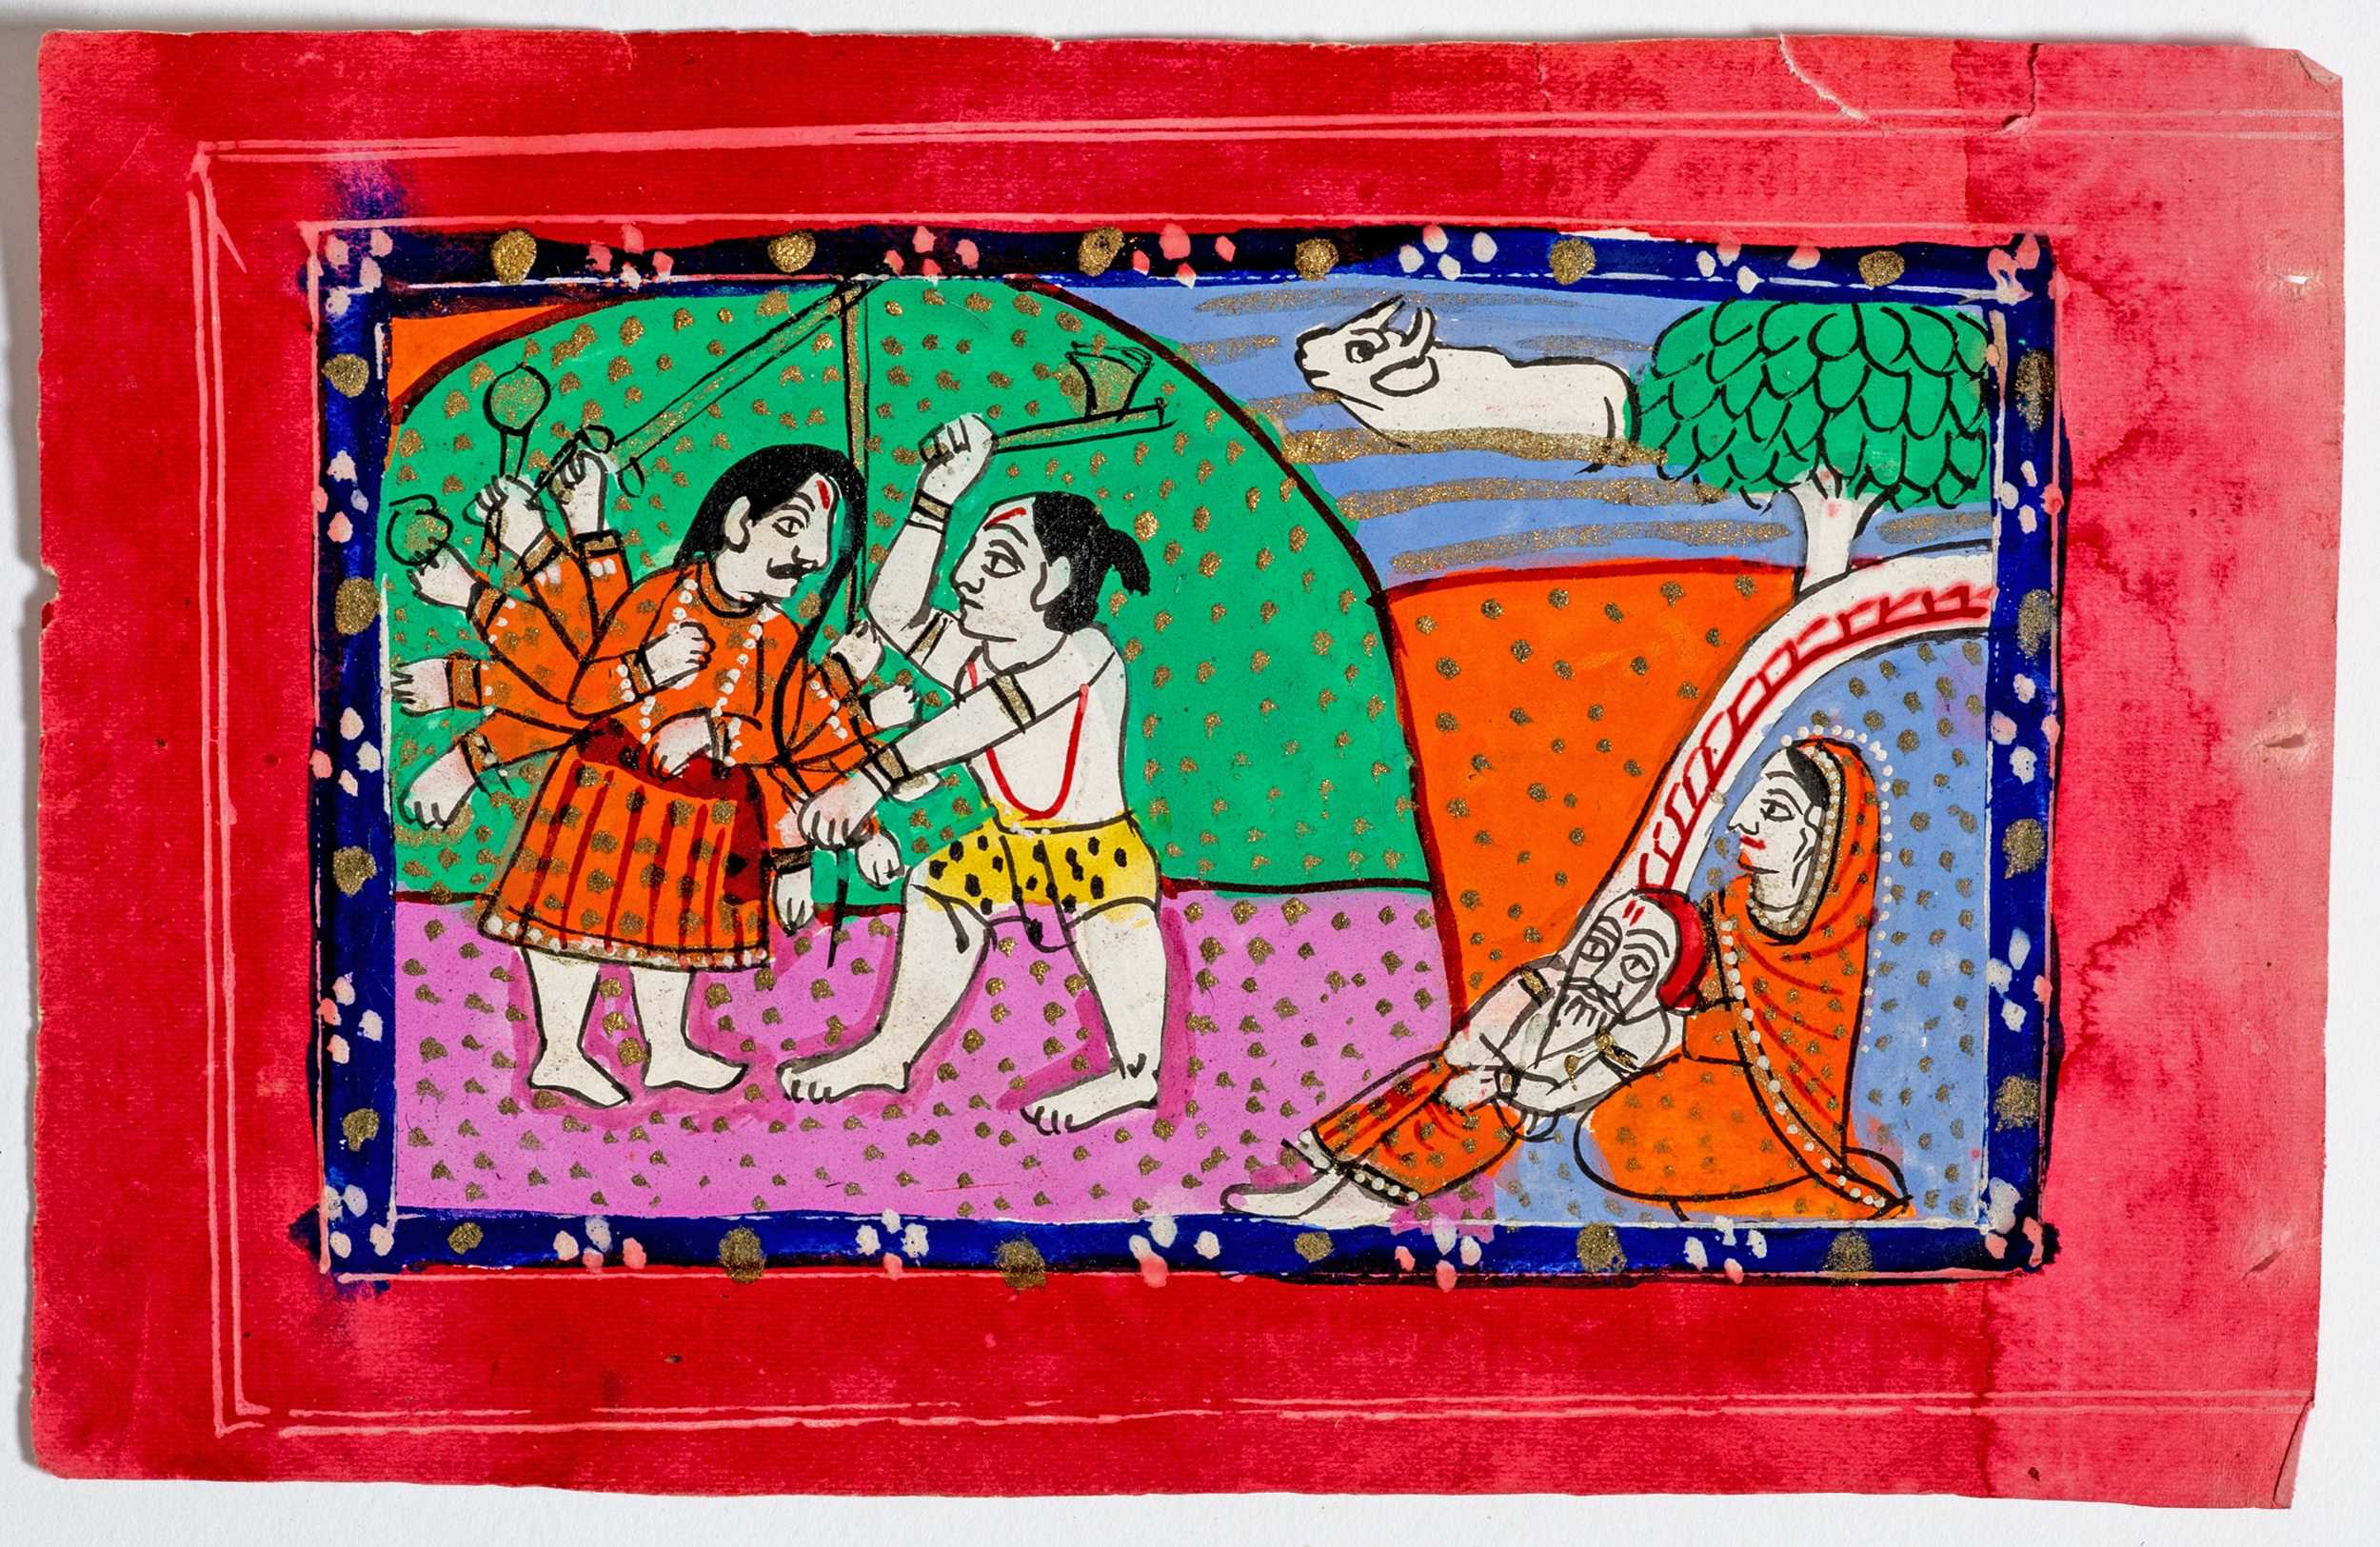 AN INDIAN MINIATURE PAINTING OF RAMA WITH AXE